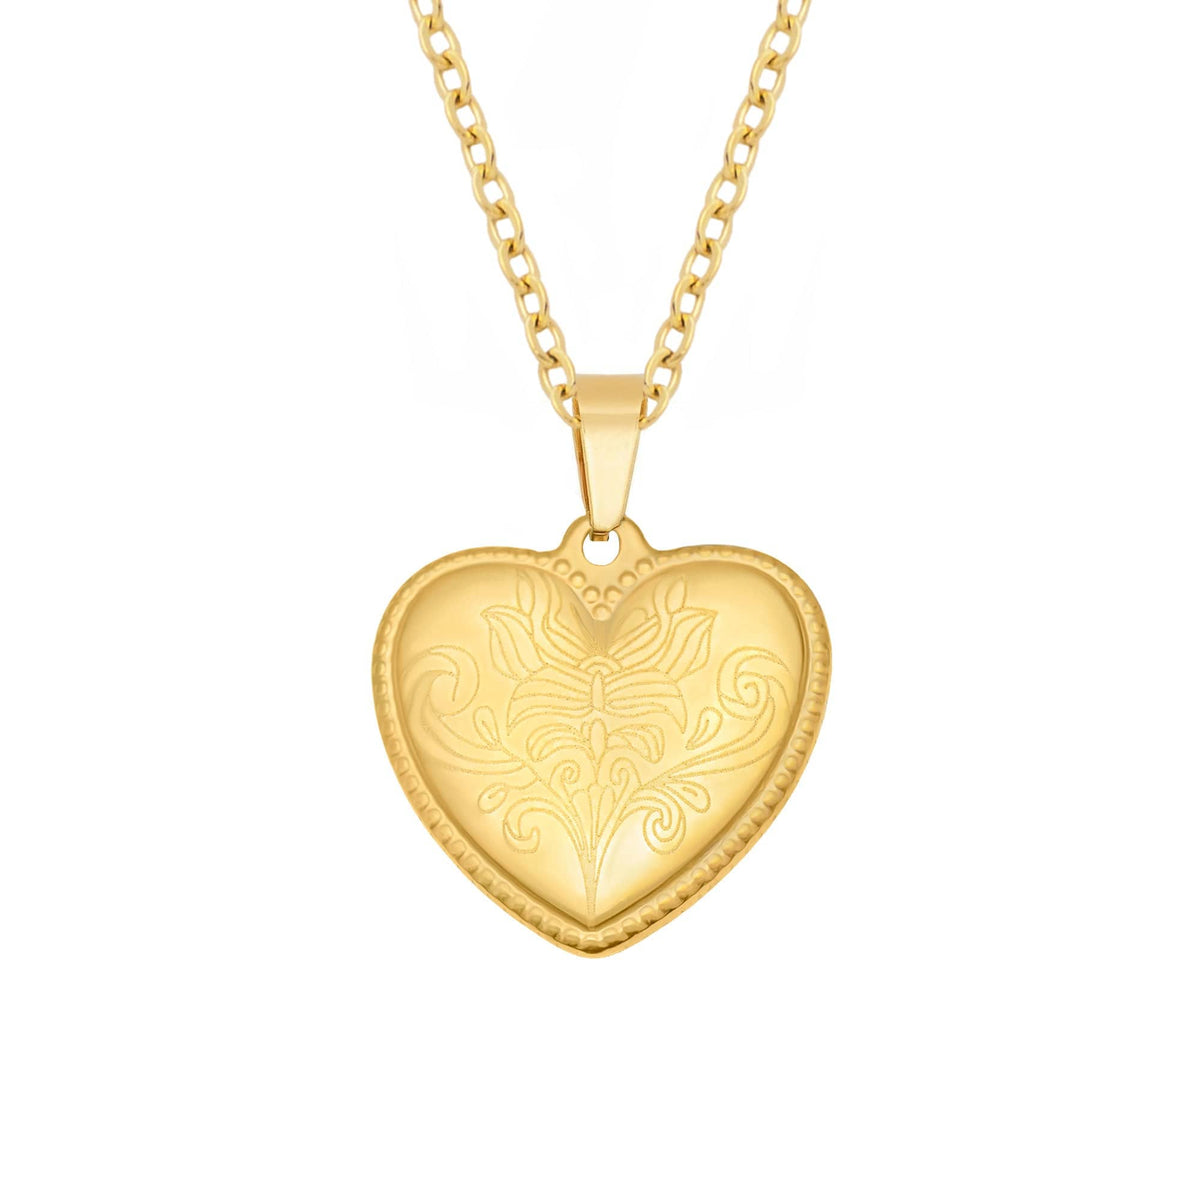 BohoMoon Stainless Steel Engraved Heart Necklace Gold